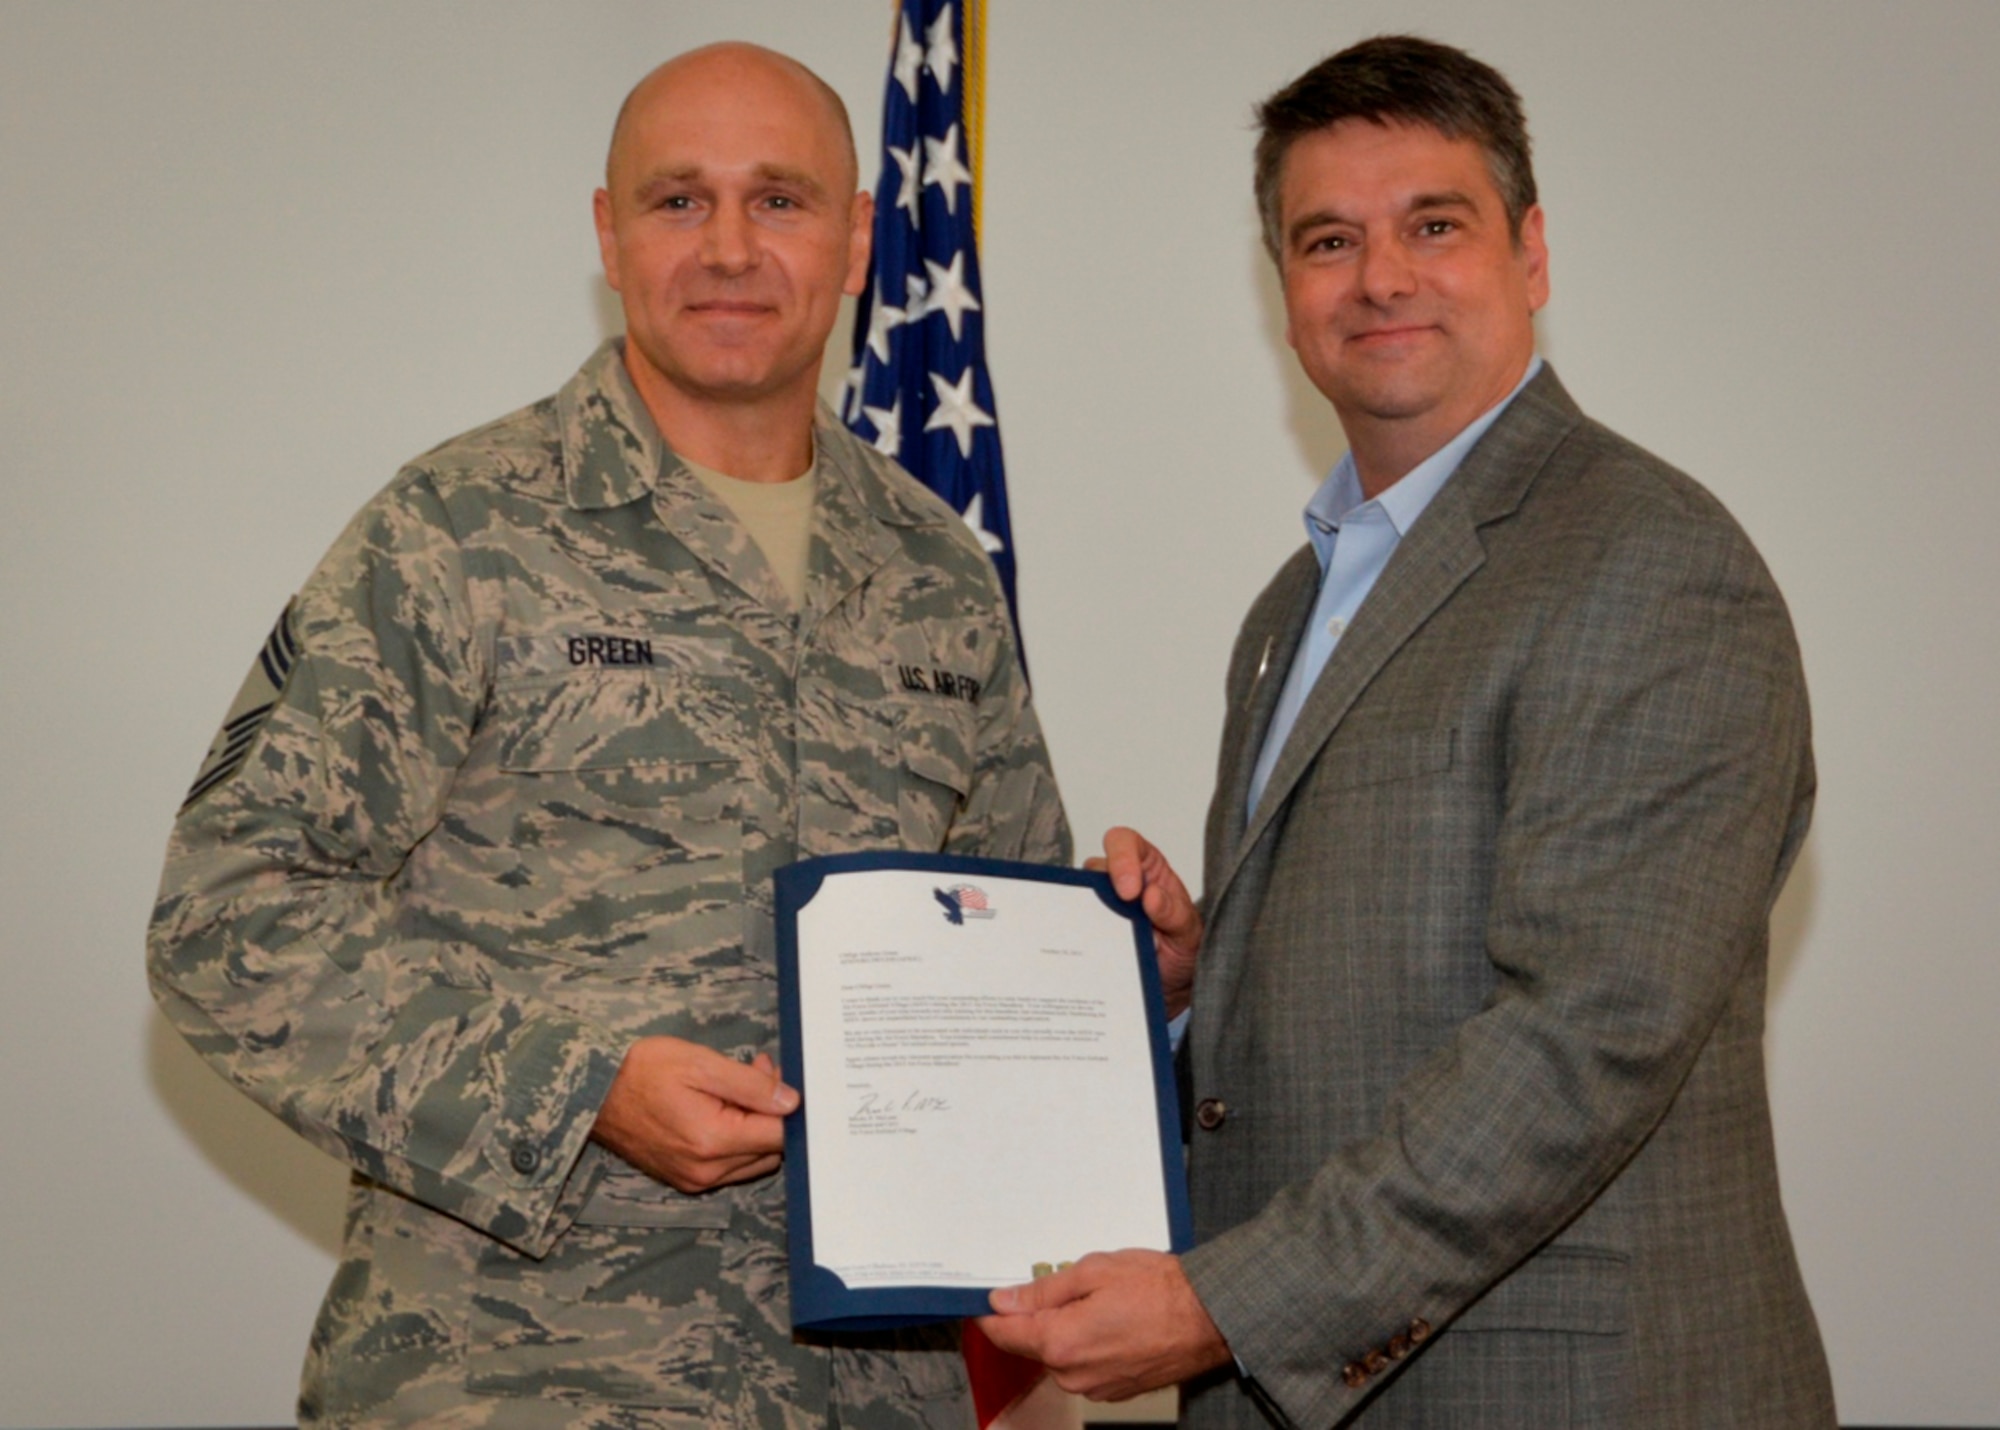 Chief Master Sgt. Anthony Green, Air Force Special Operations Air Warfare Center, receives a letter of appreciation from Ret. Chief Master Sgt. Scott Delveau, Director of Development for the Air Force Enlisted Village, during an AFSOAWC awards ceremony Oct. 29  at Duke Field, Fla.   Green raised $500 to benefit the AFEV by running the Air Force Marathon, Sept. 19 at the National Museum of the U.S. Air Force in Ohio.  AFEV is a non-profit organization that provides safe, secure and dignified homes for surviving spouses of retired Air Force personnel.  (Courtesy photo)